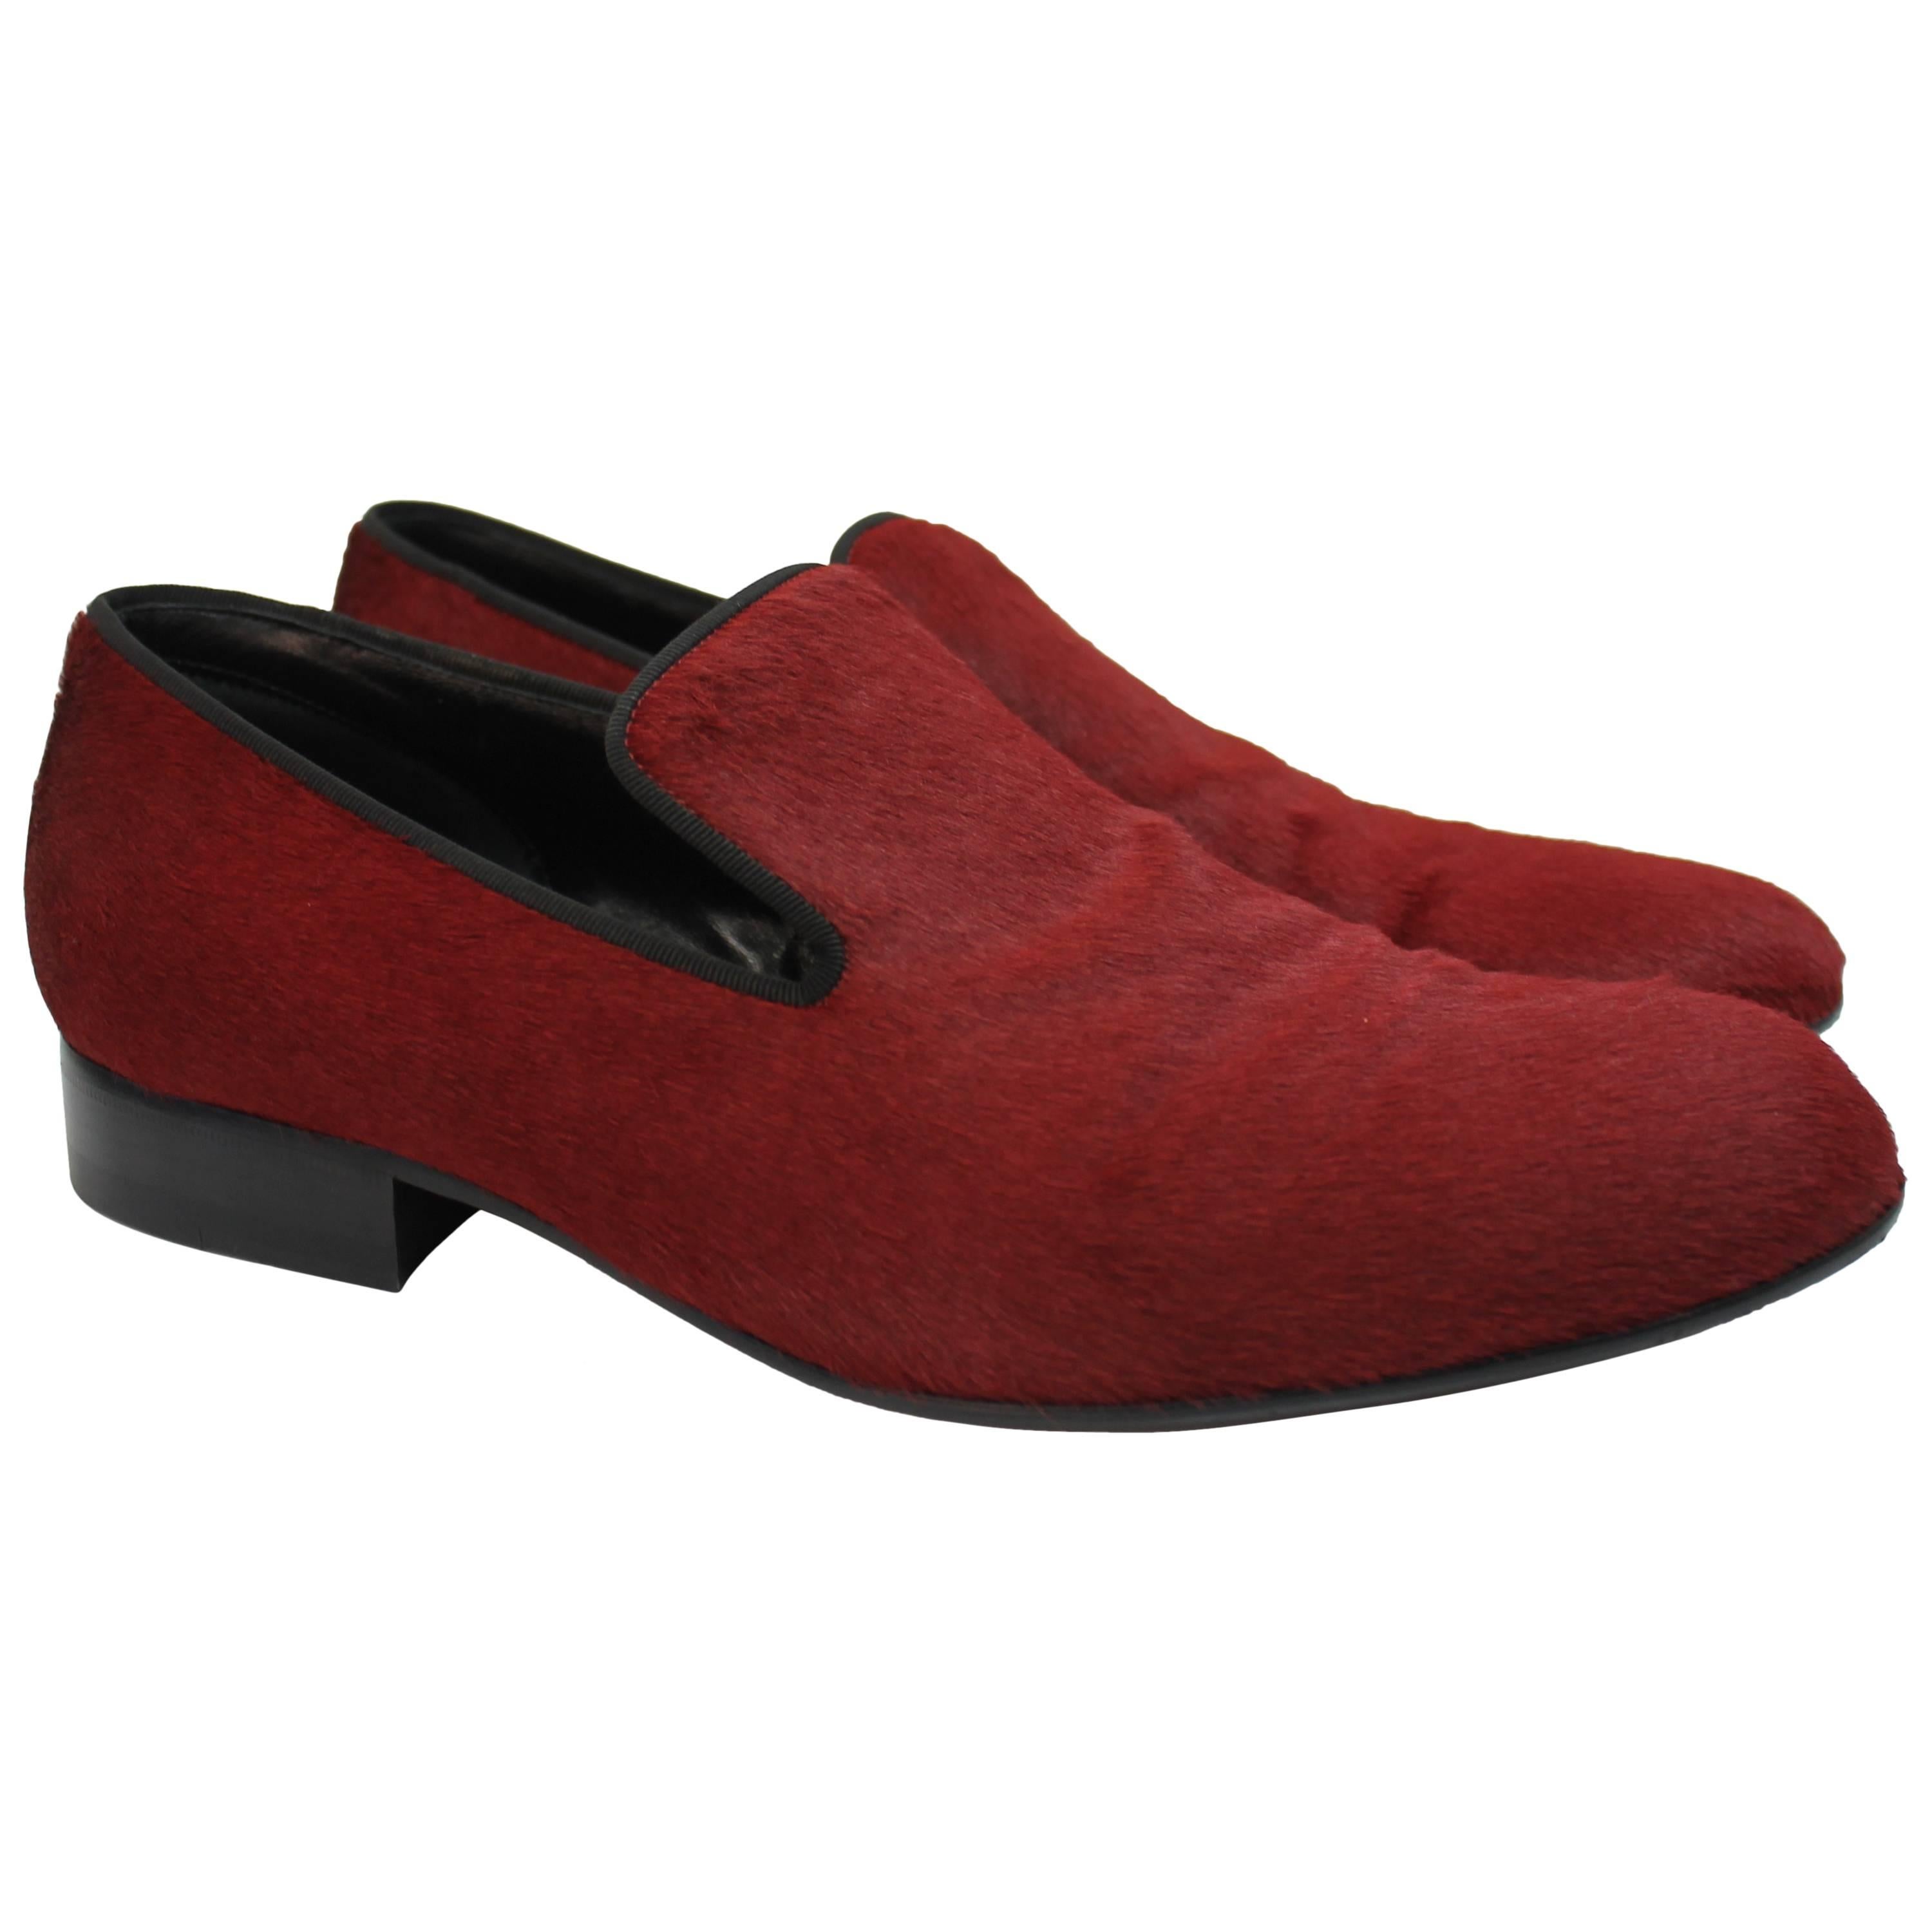 Celine Red Pony-Hair Loafers